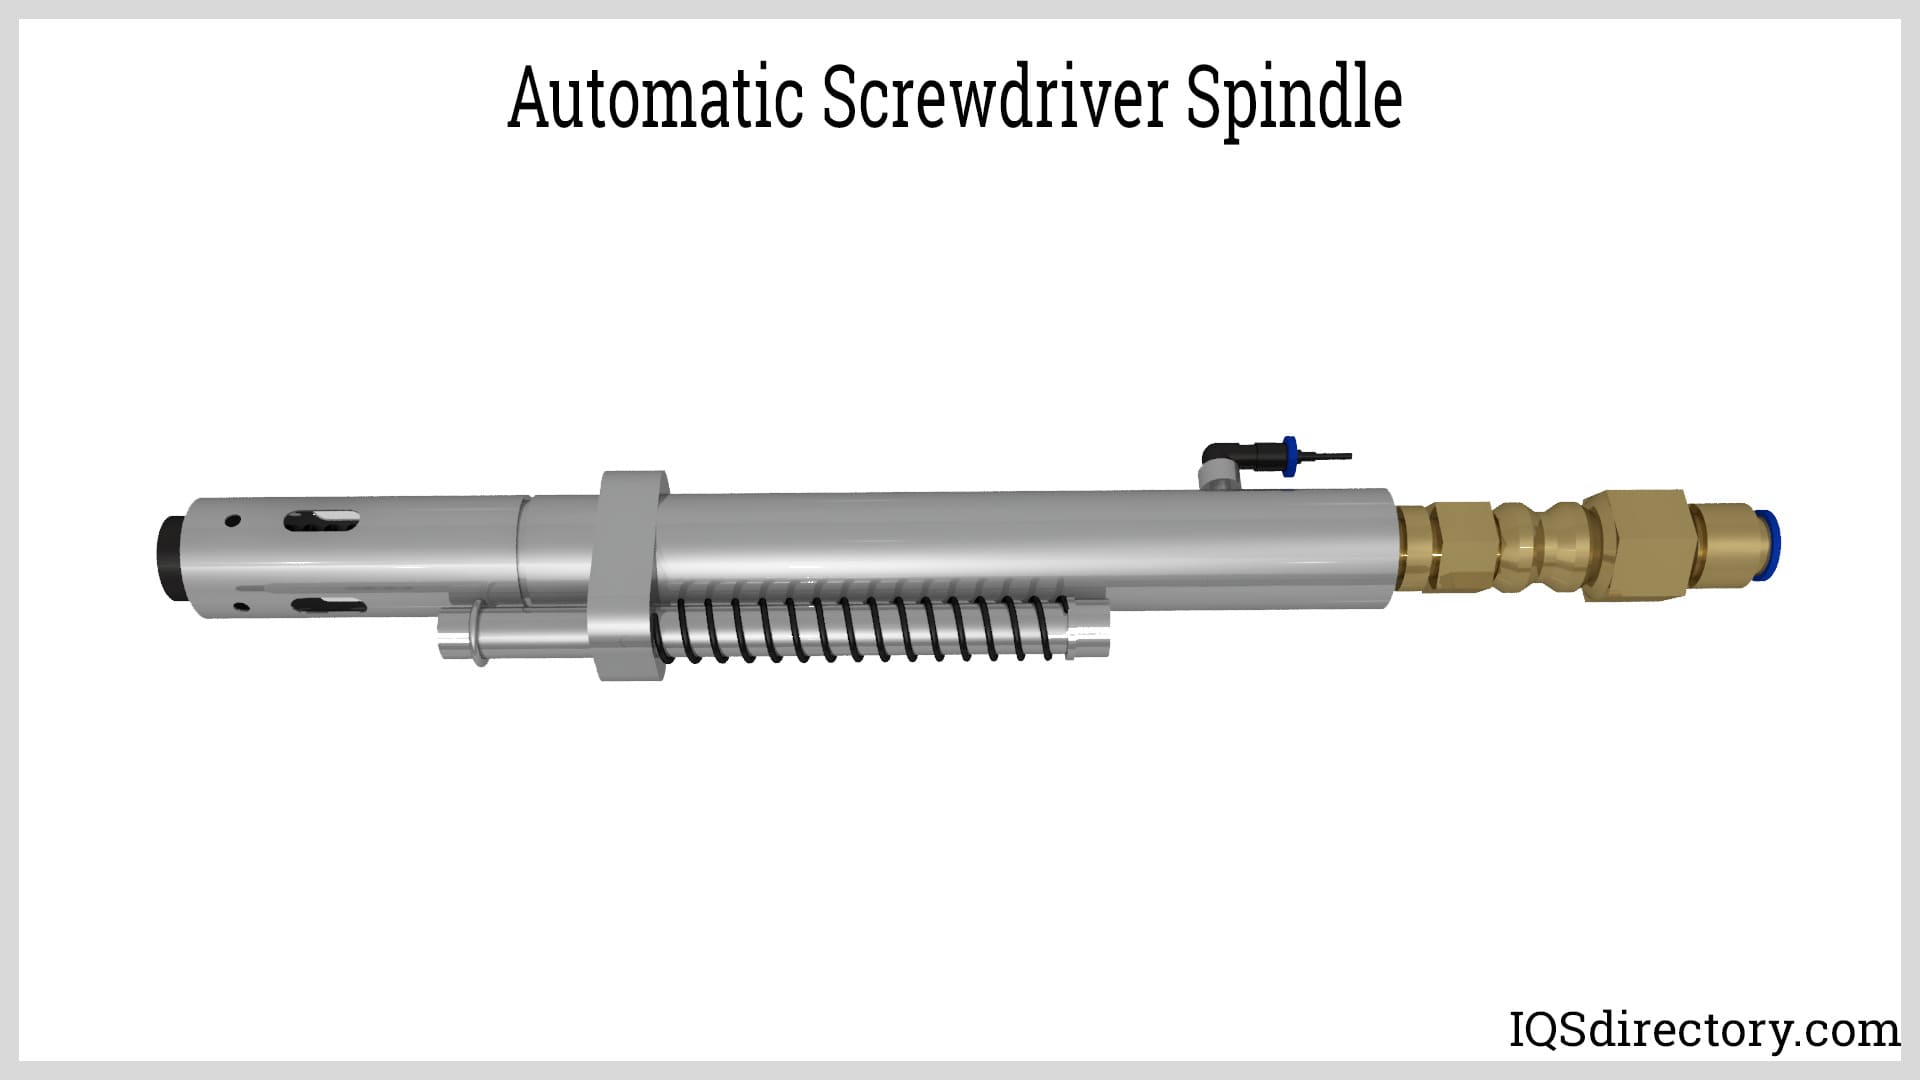 Automatic Screwdriver Spindle